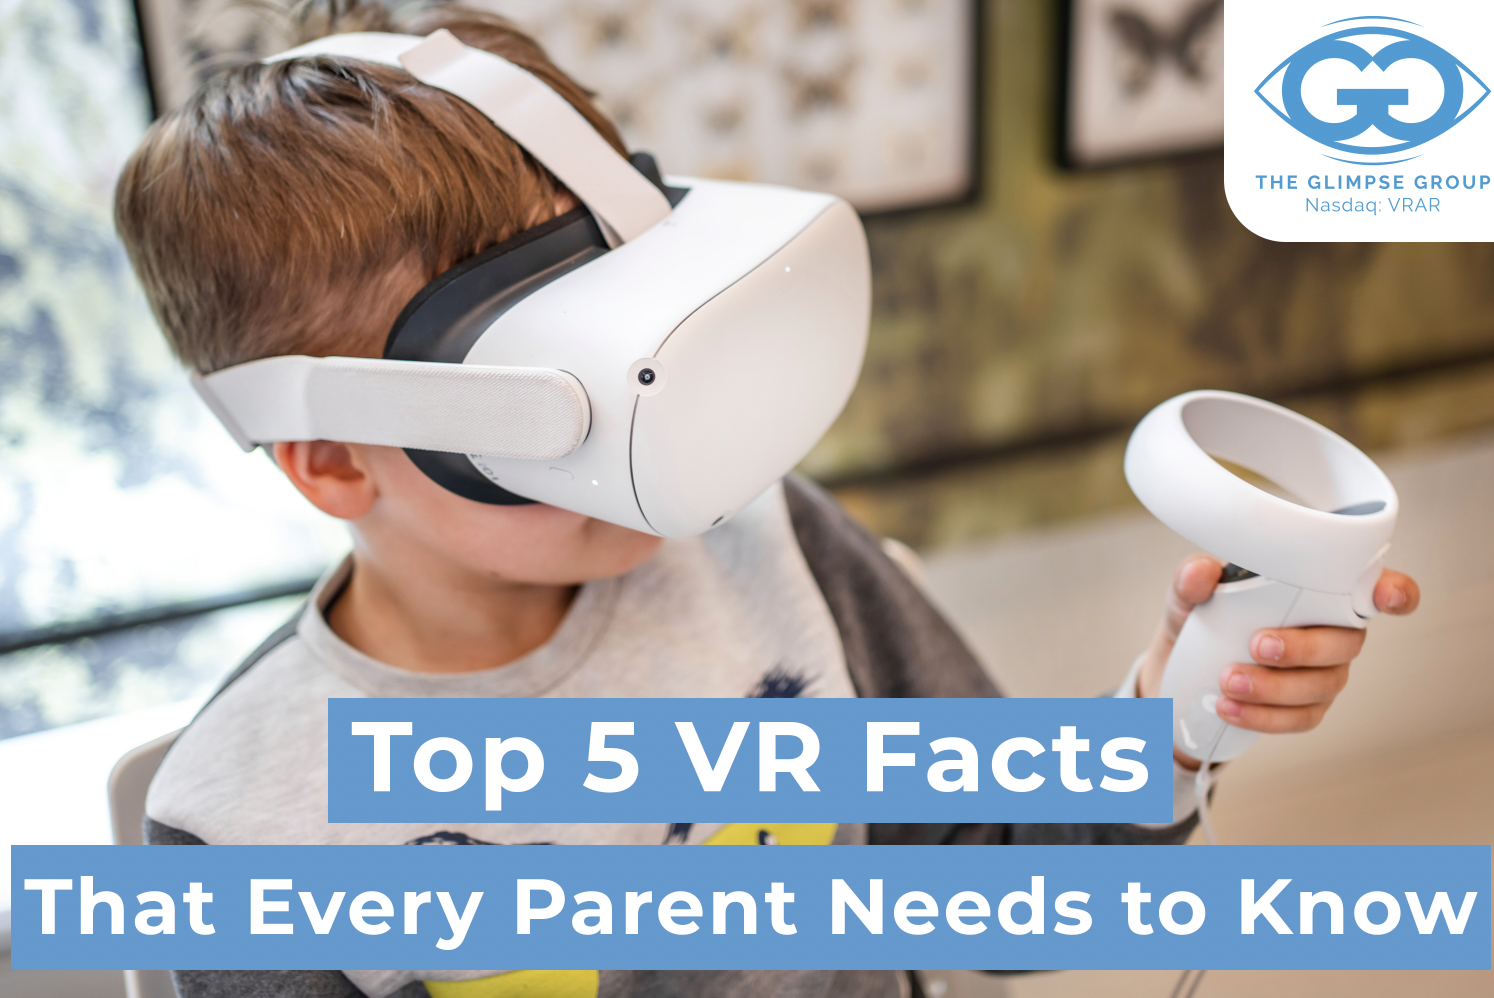 The Top 5 Things Parents Need to Know About VR